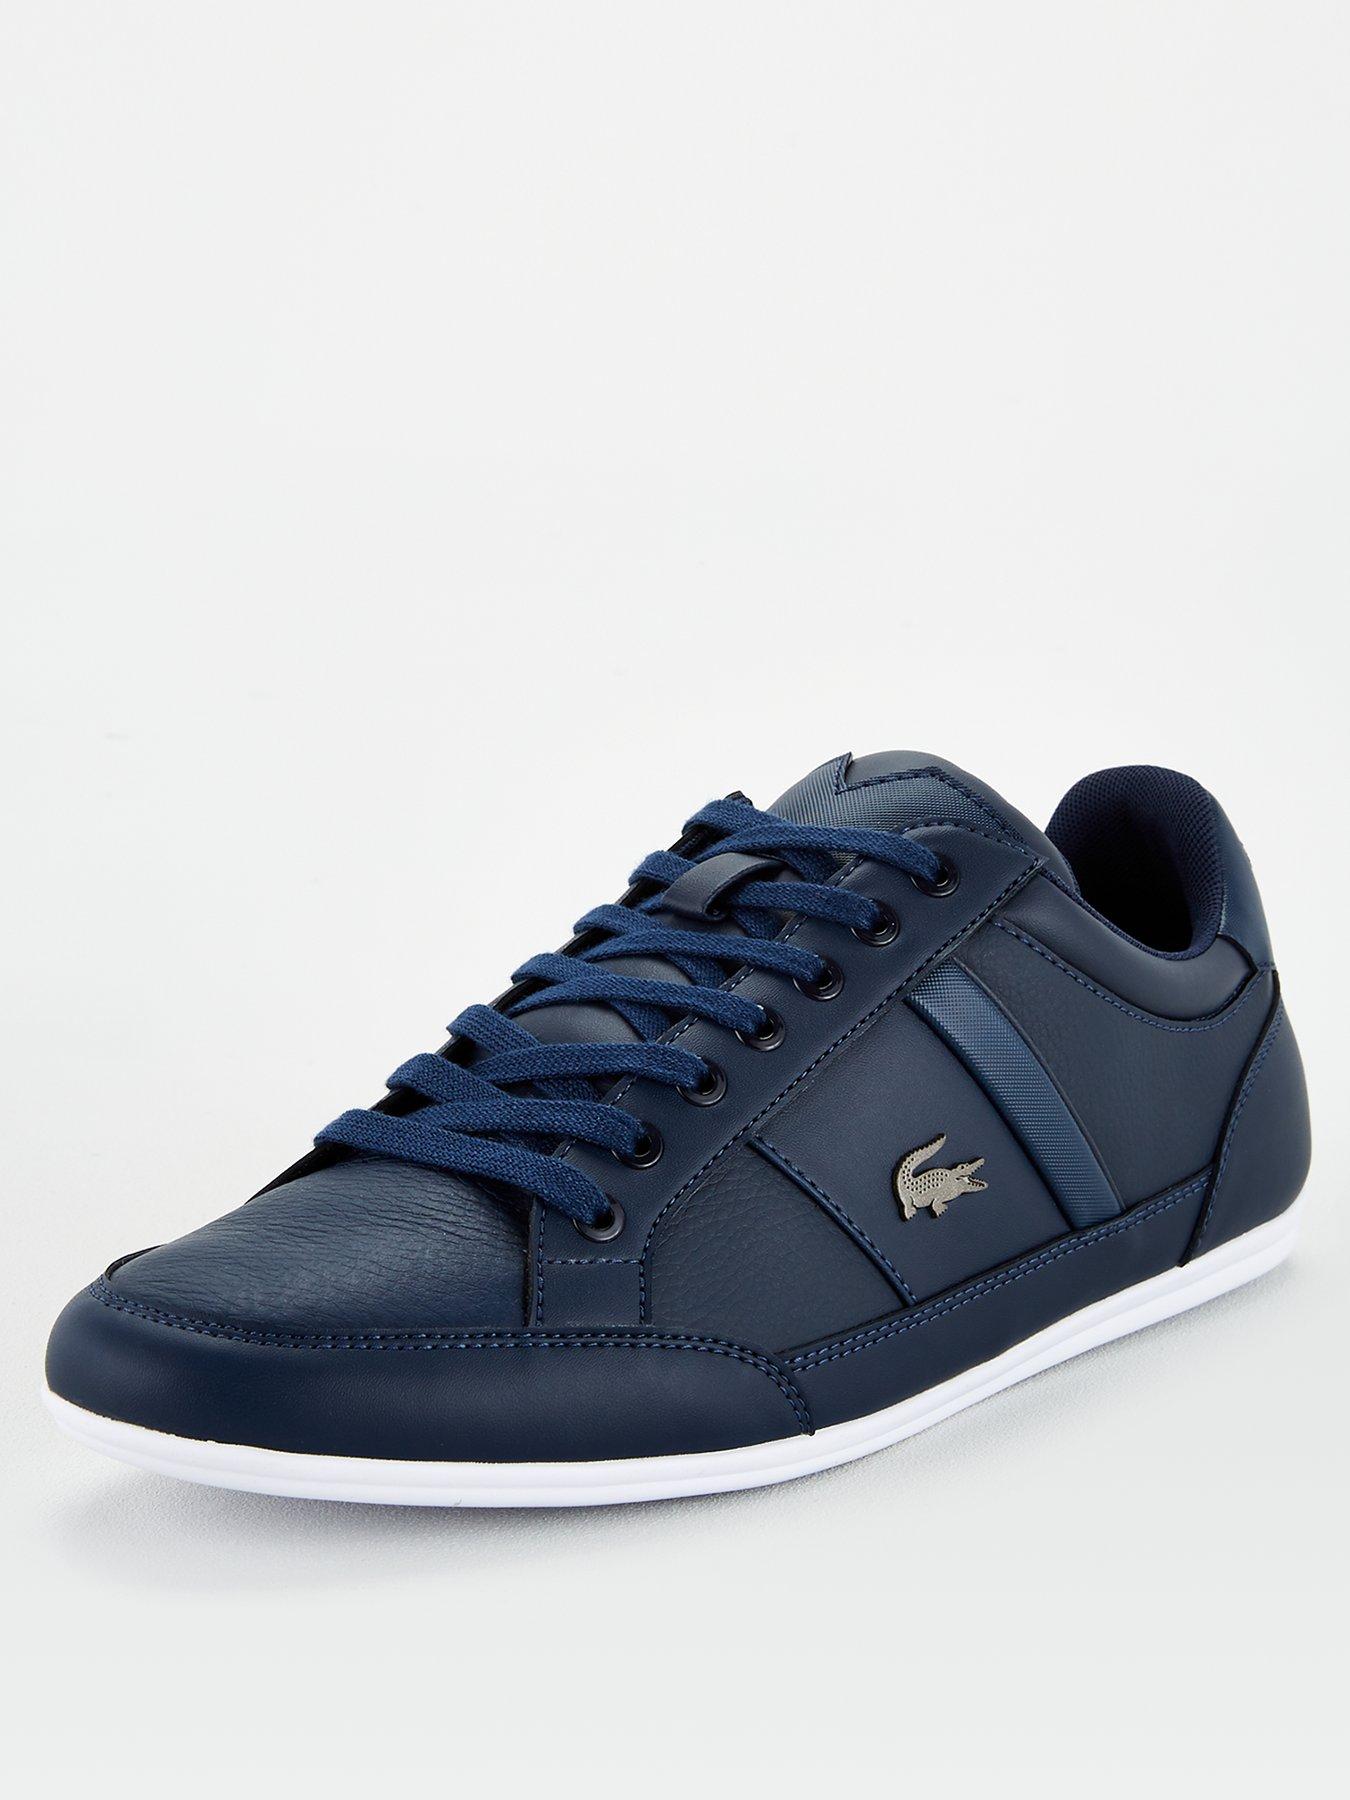 mens navy lacoste trainers